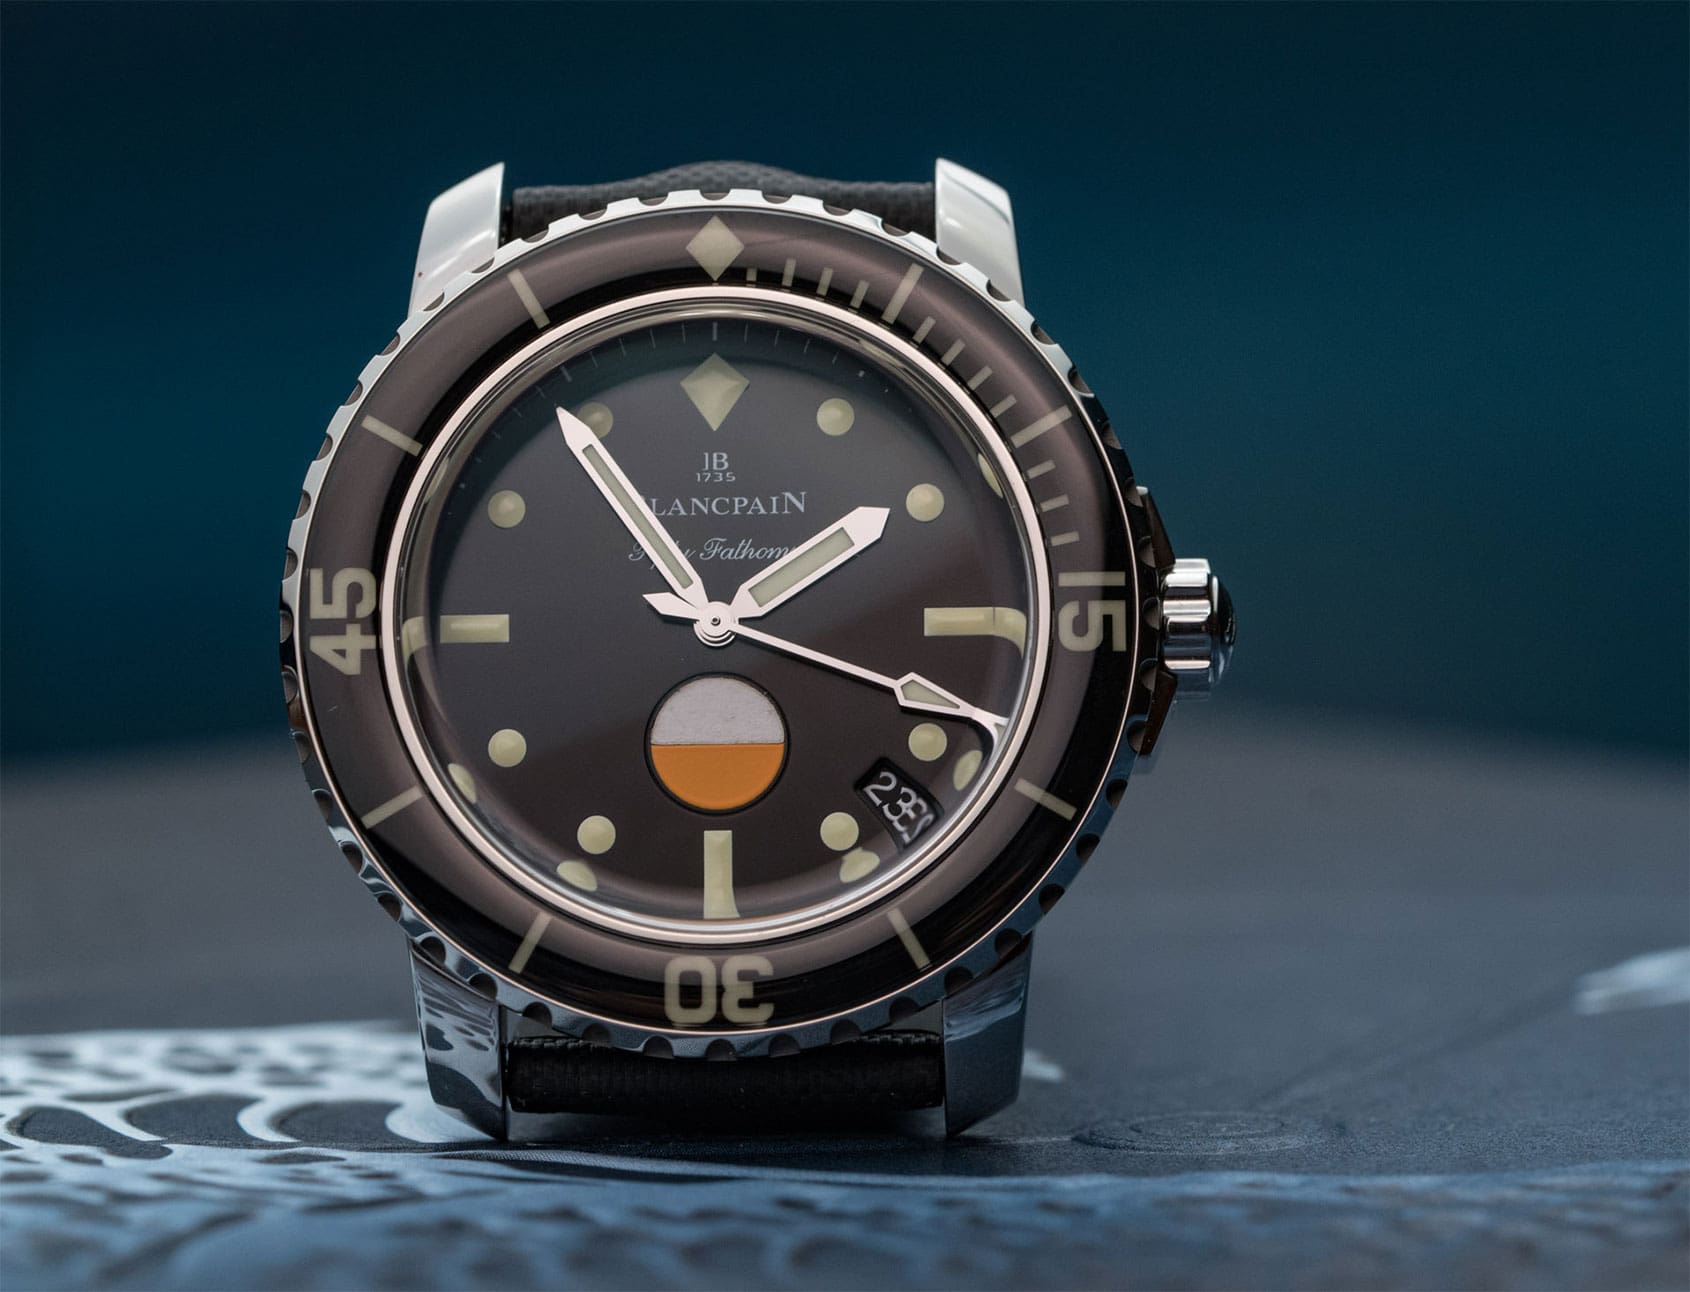 The Blancpain Fifty Fathoms that tells the story of the frogmen who used  them